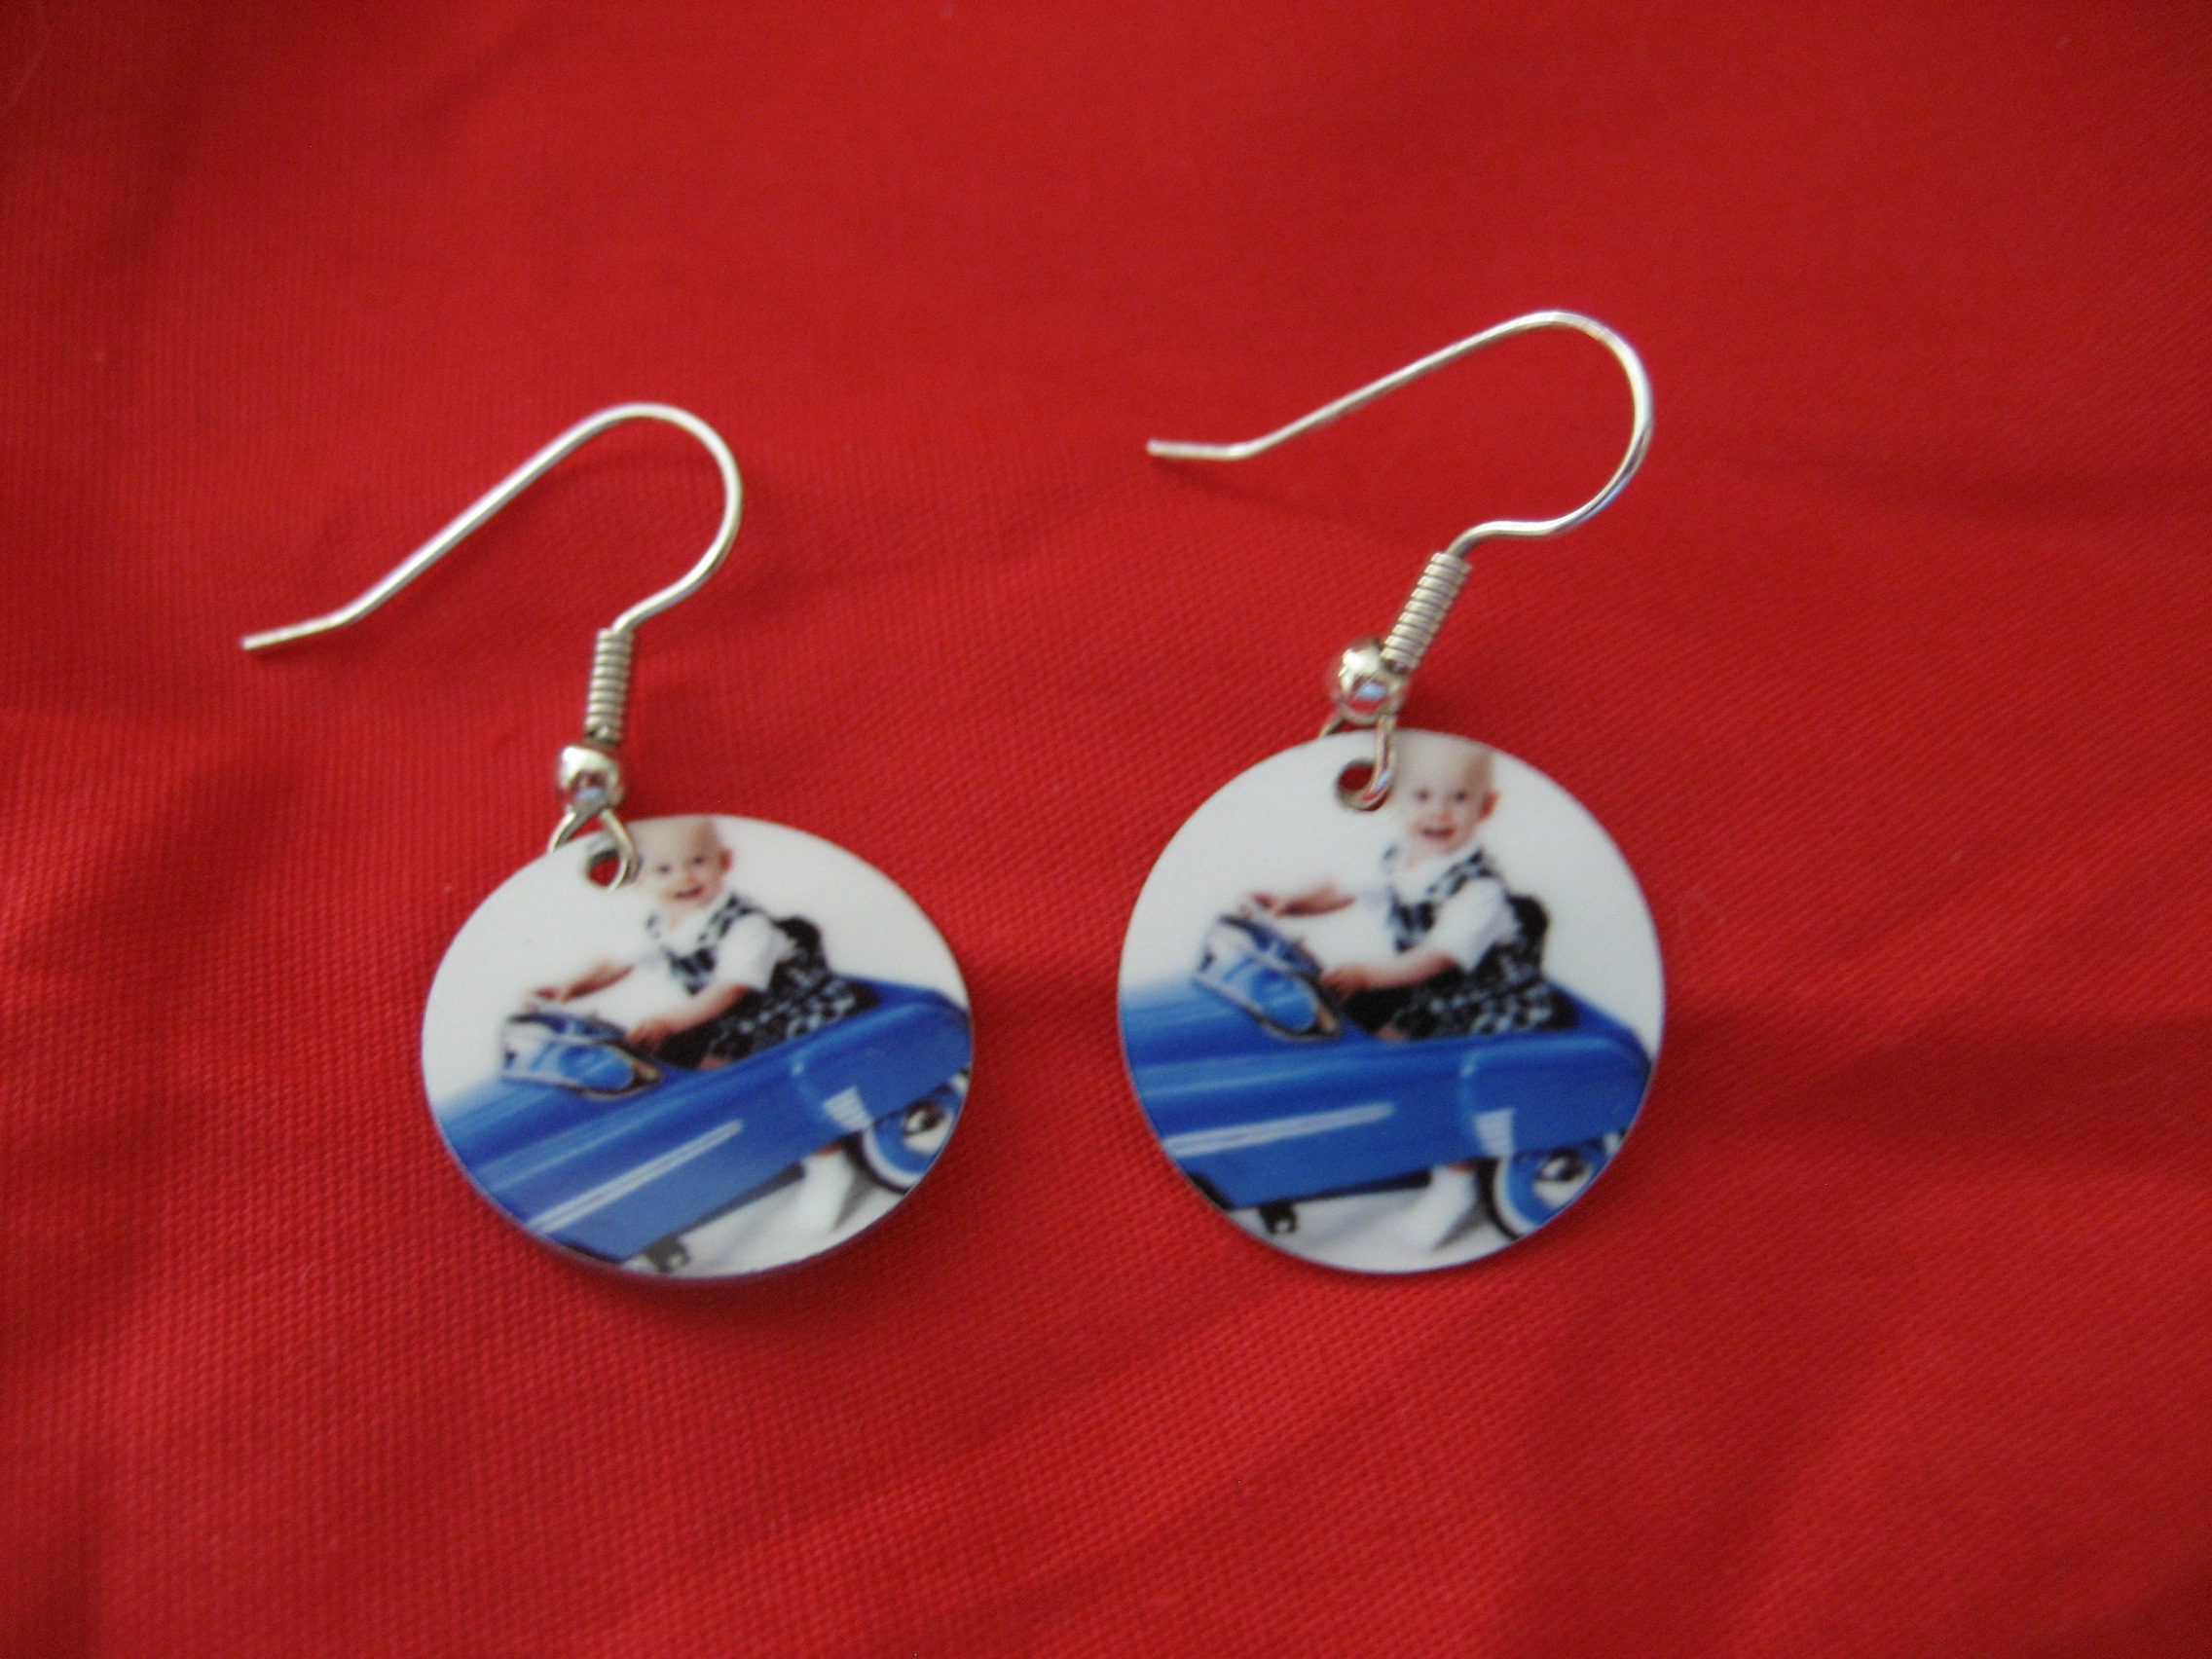 Charm Earrings made with sublimation printing